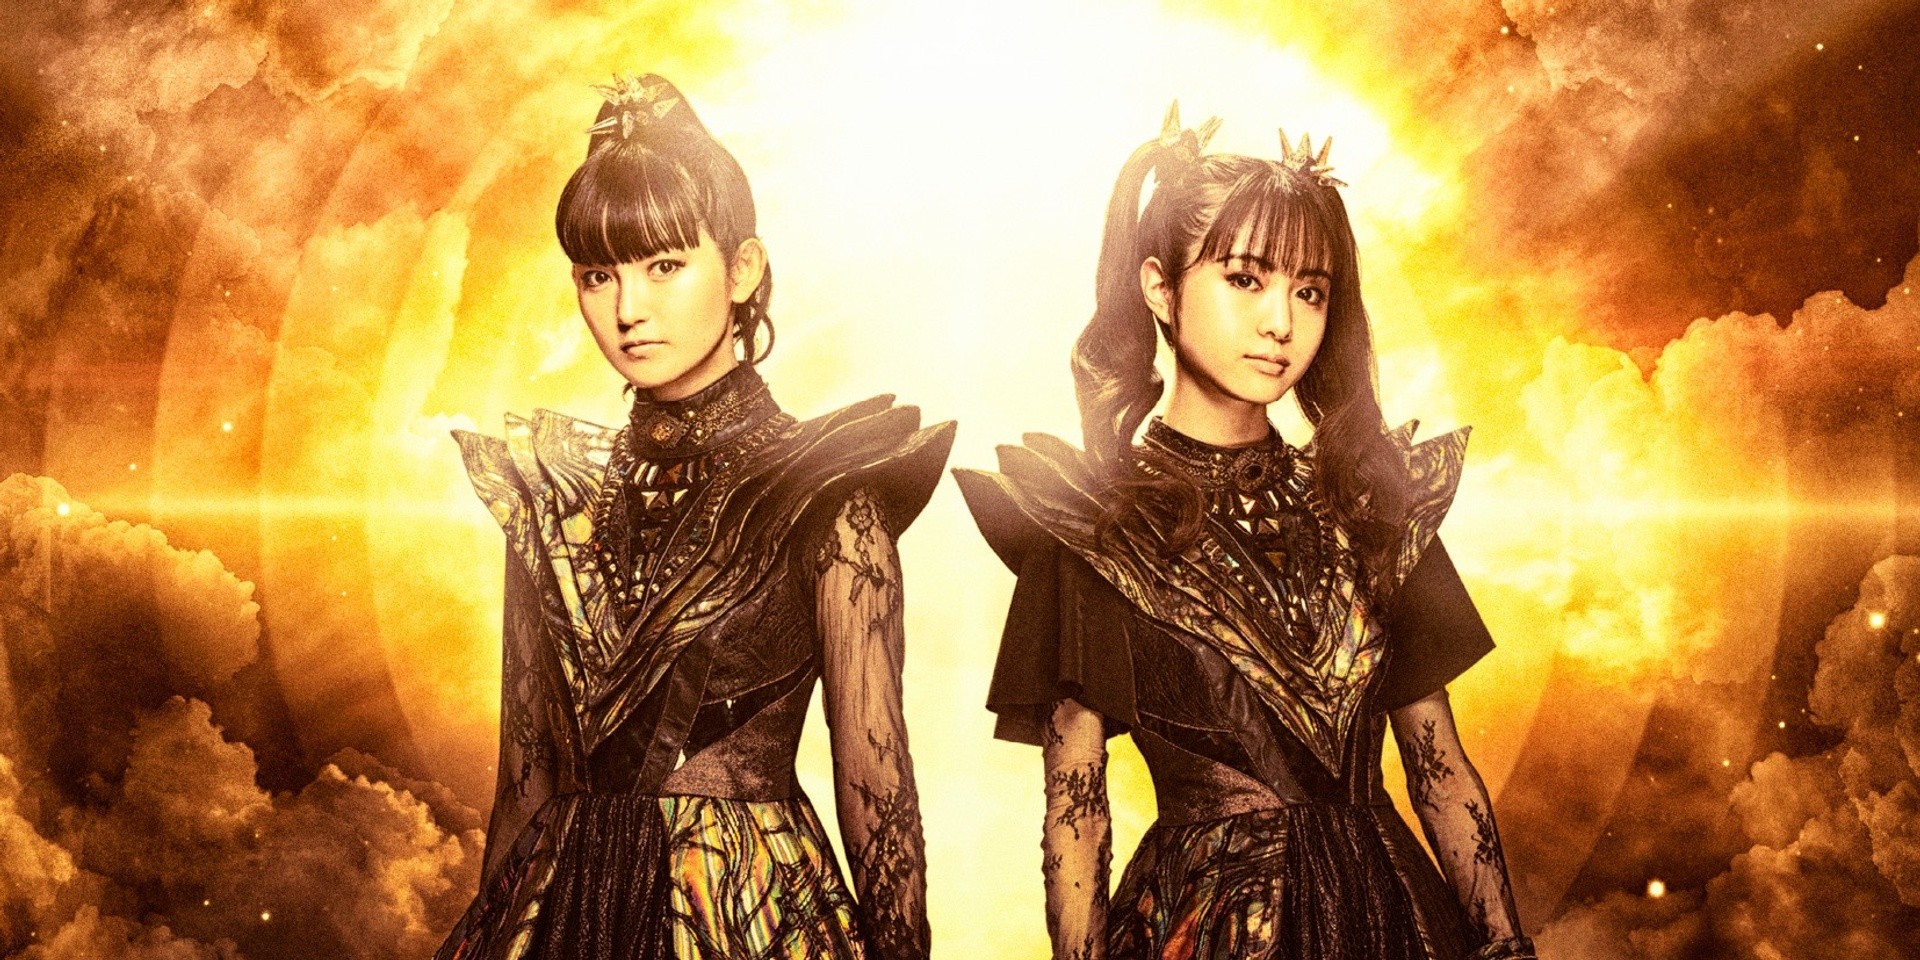 BABYMETAL to play 10 live concerts in Japan starting in January